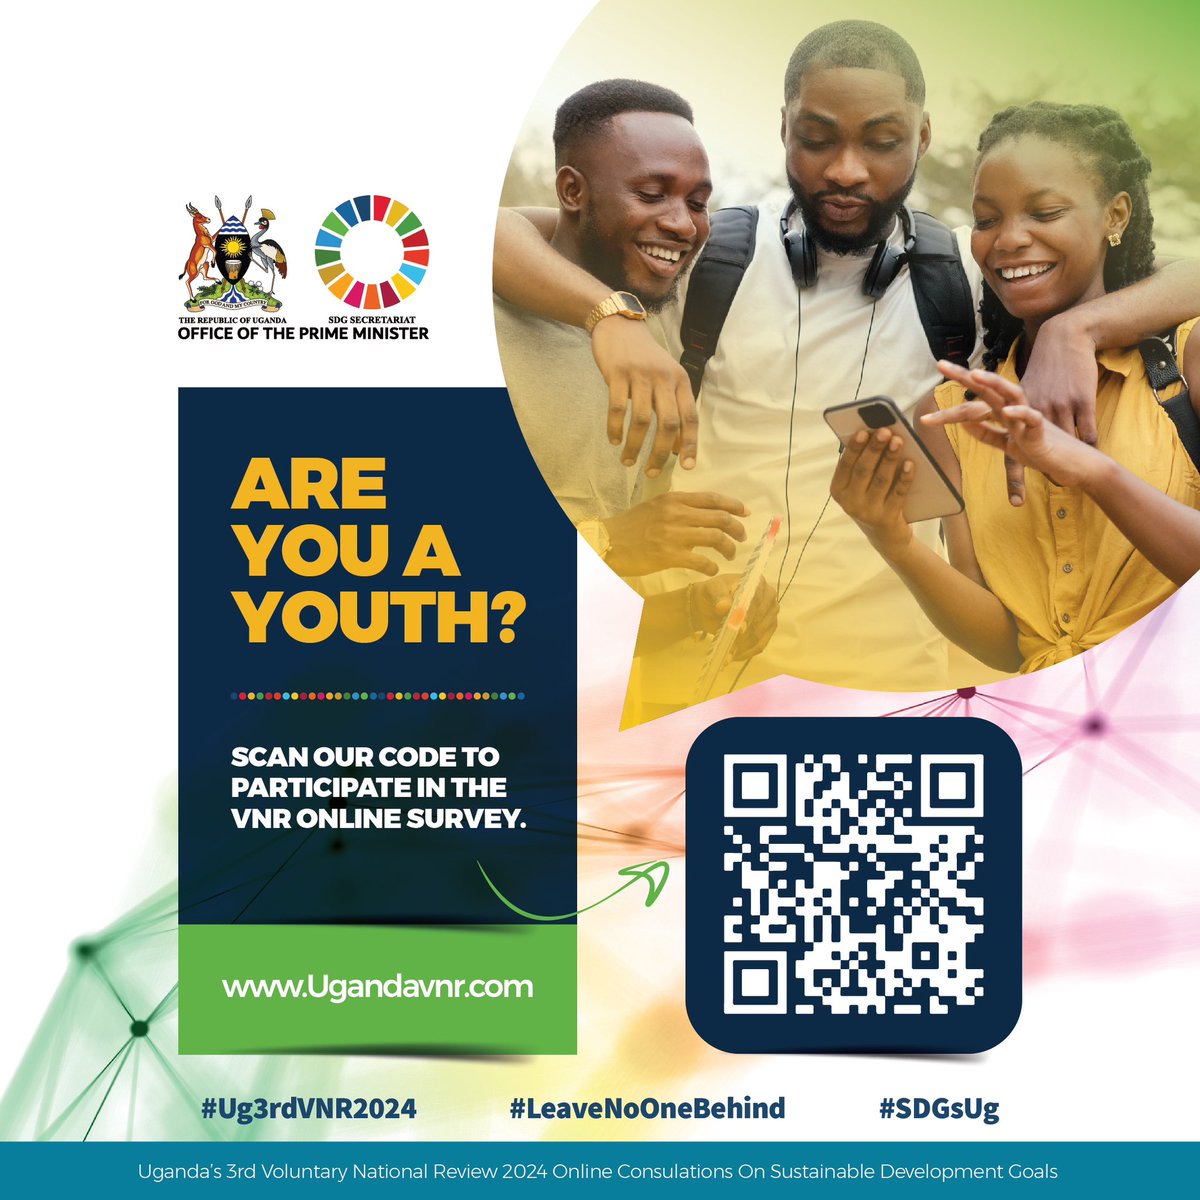 Voluntary National Reviews (VNRs) will play a pivotal role in facilitating the exchange of experiences, including successes, challenges, and lessons
learned, to accelerate the implementation of the 2030 Agenda.

To take part in the survey:
 surl.li/shmzq

#Ug3rdVNR2024